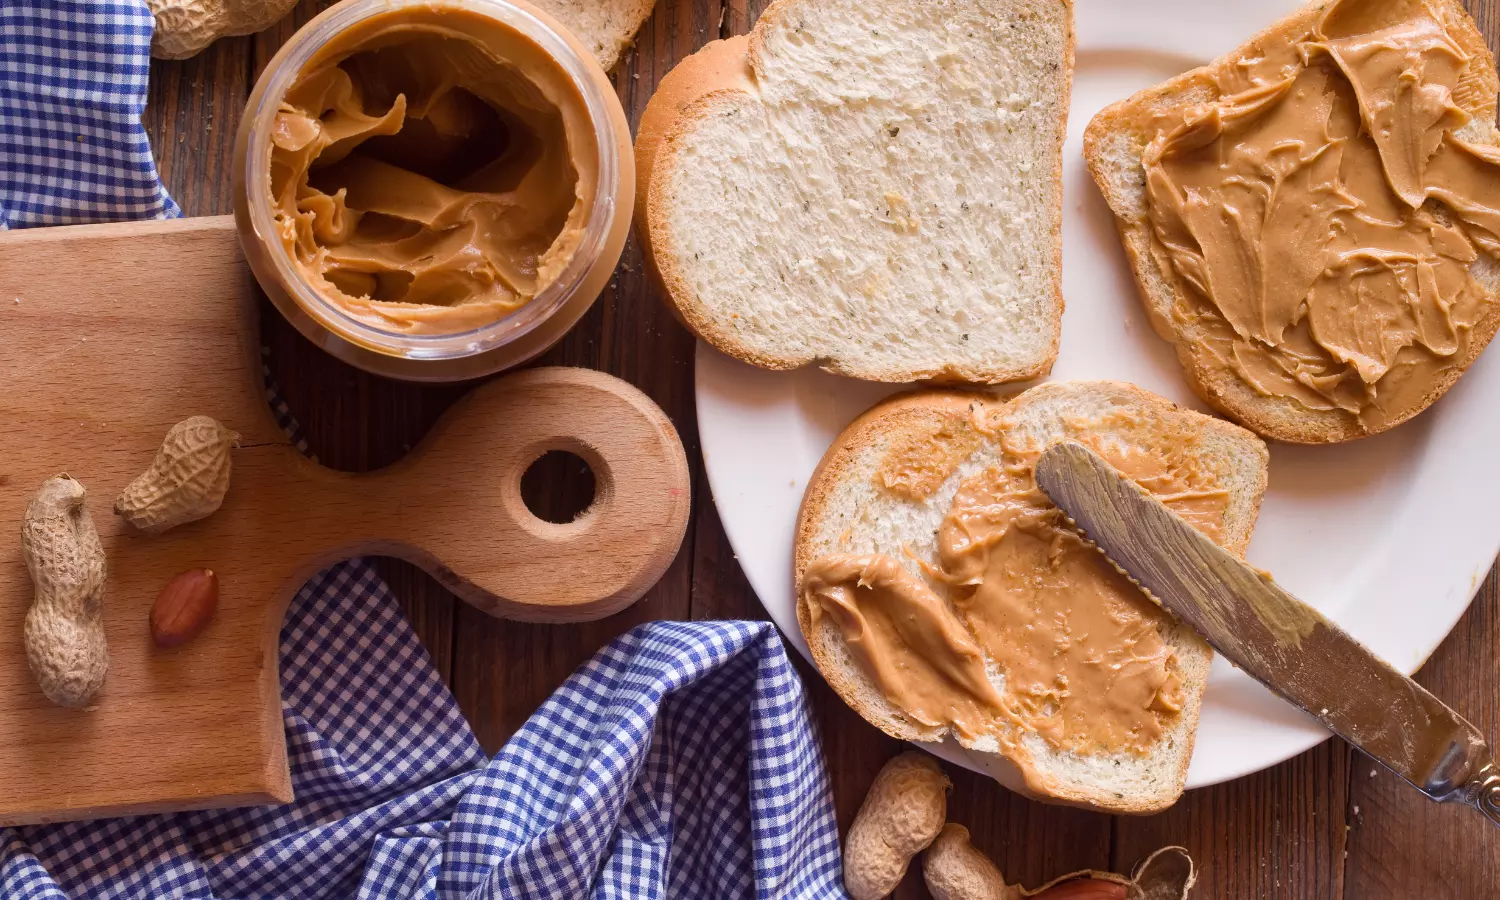 10 recipes to make life better with peanut butter